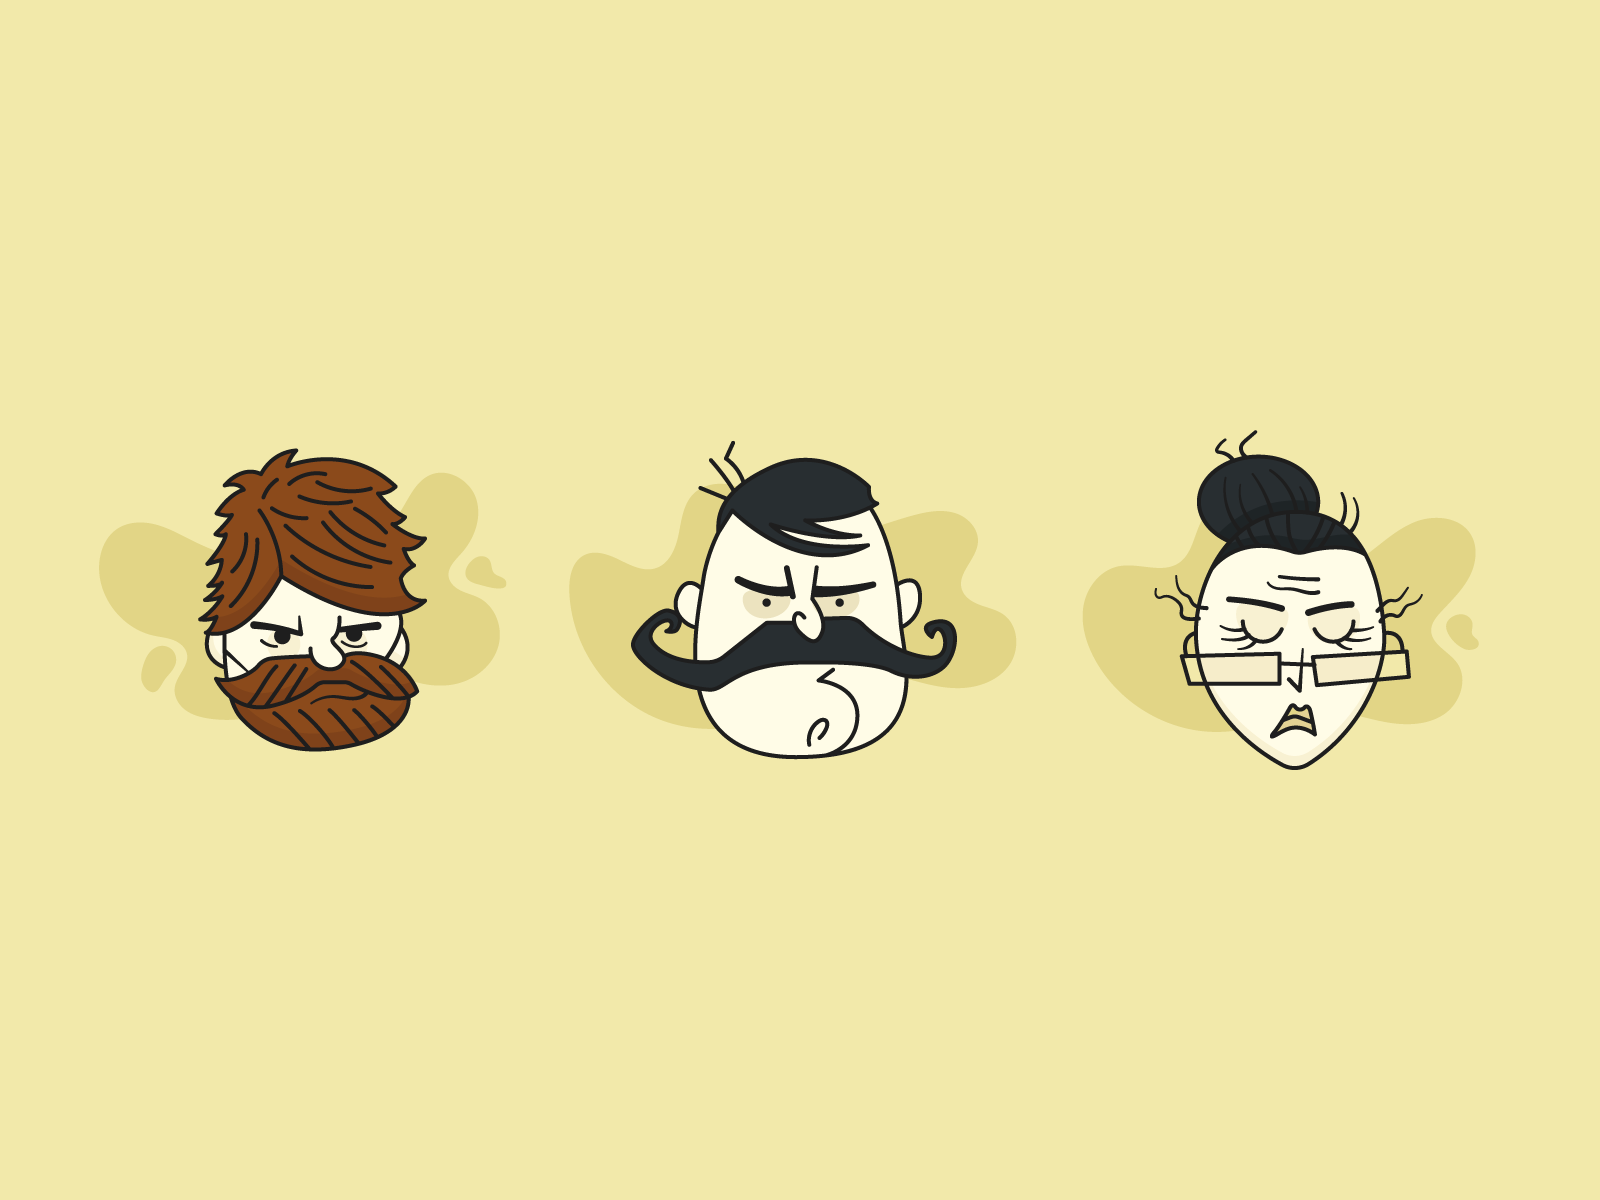 Don't Starve Together Characters - 2 character character design game character design icon illustration klei games online game wickerbottom woodie